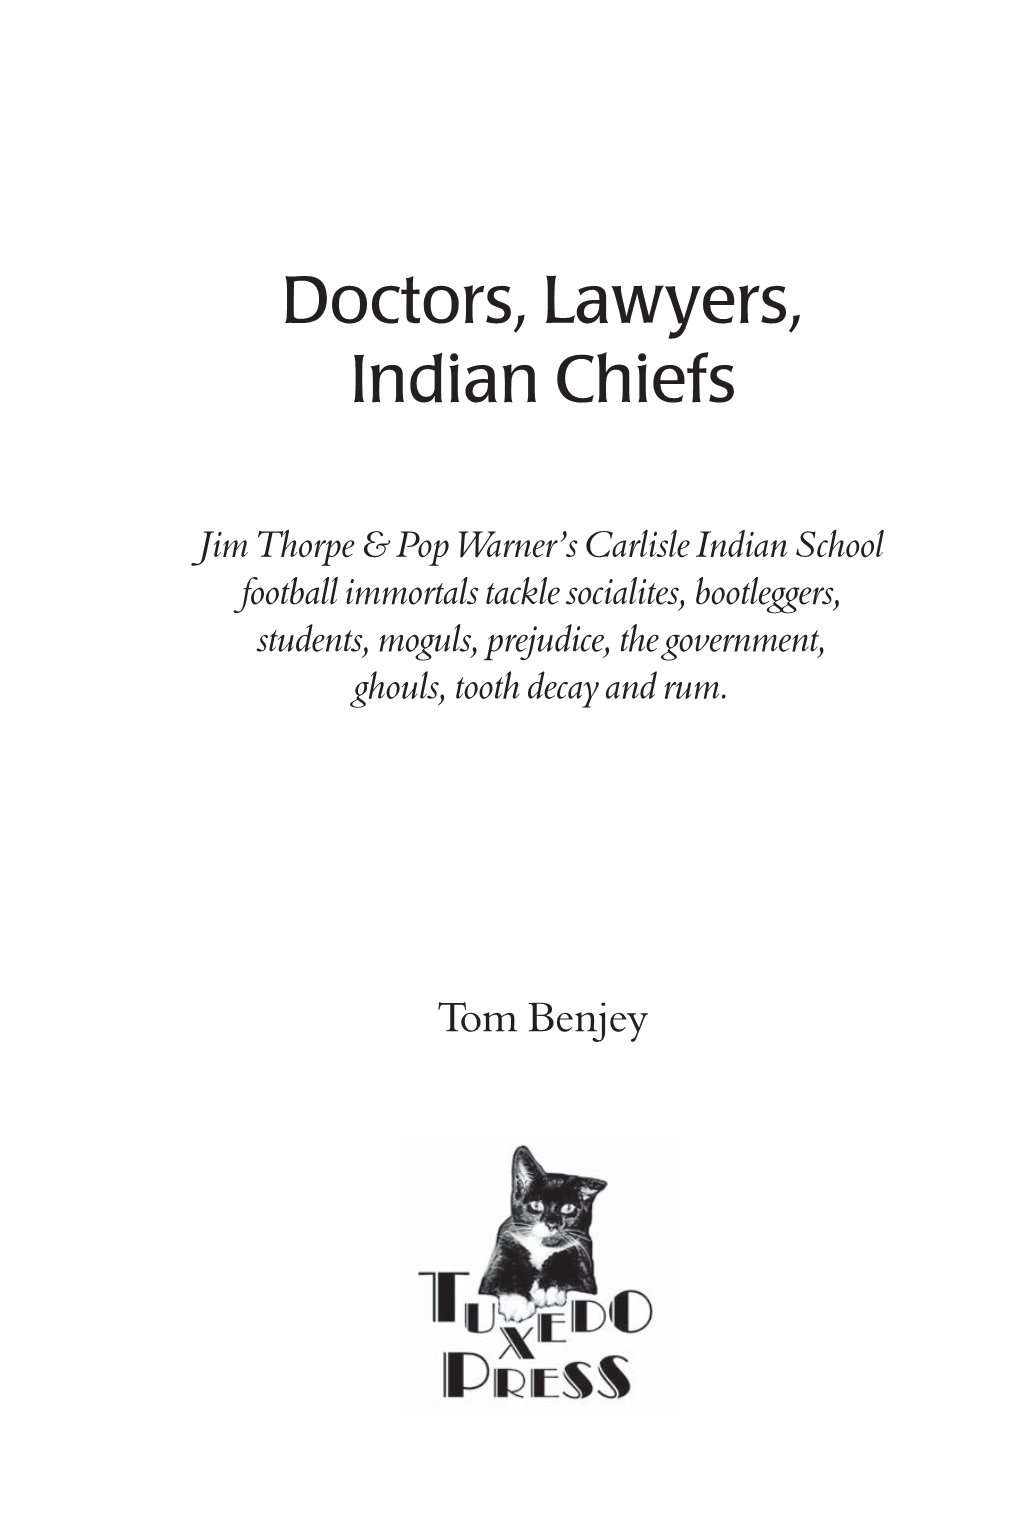 Doctors, Lawyers, Indian Chiefs